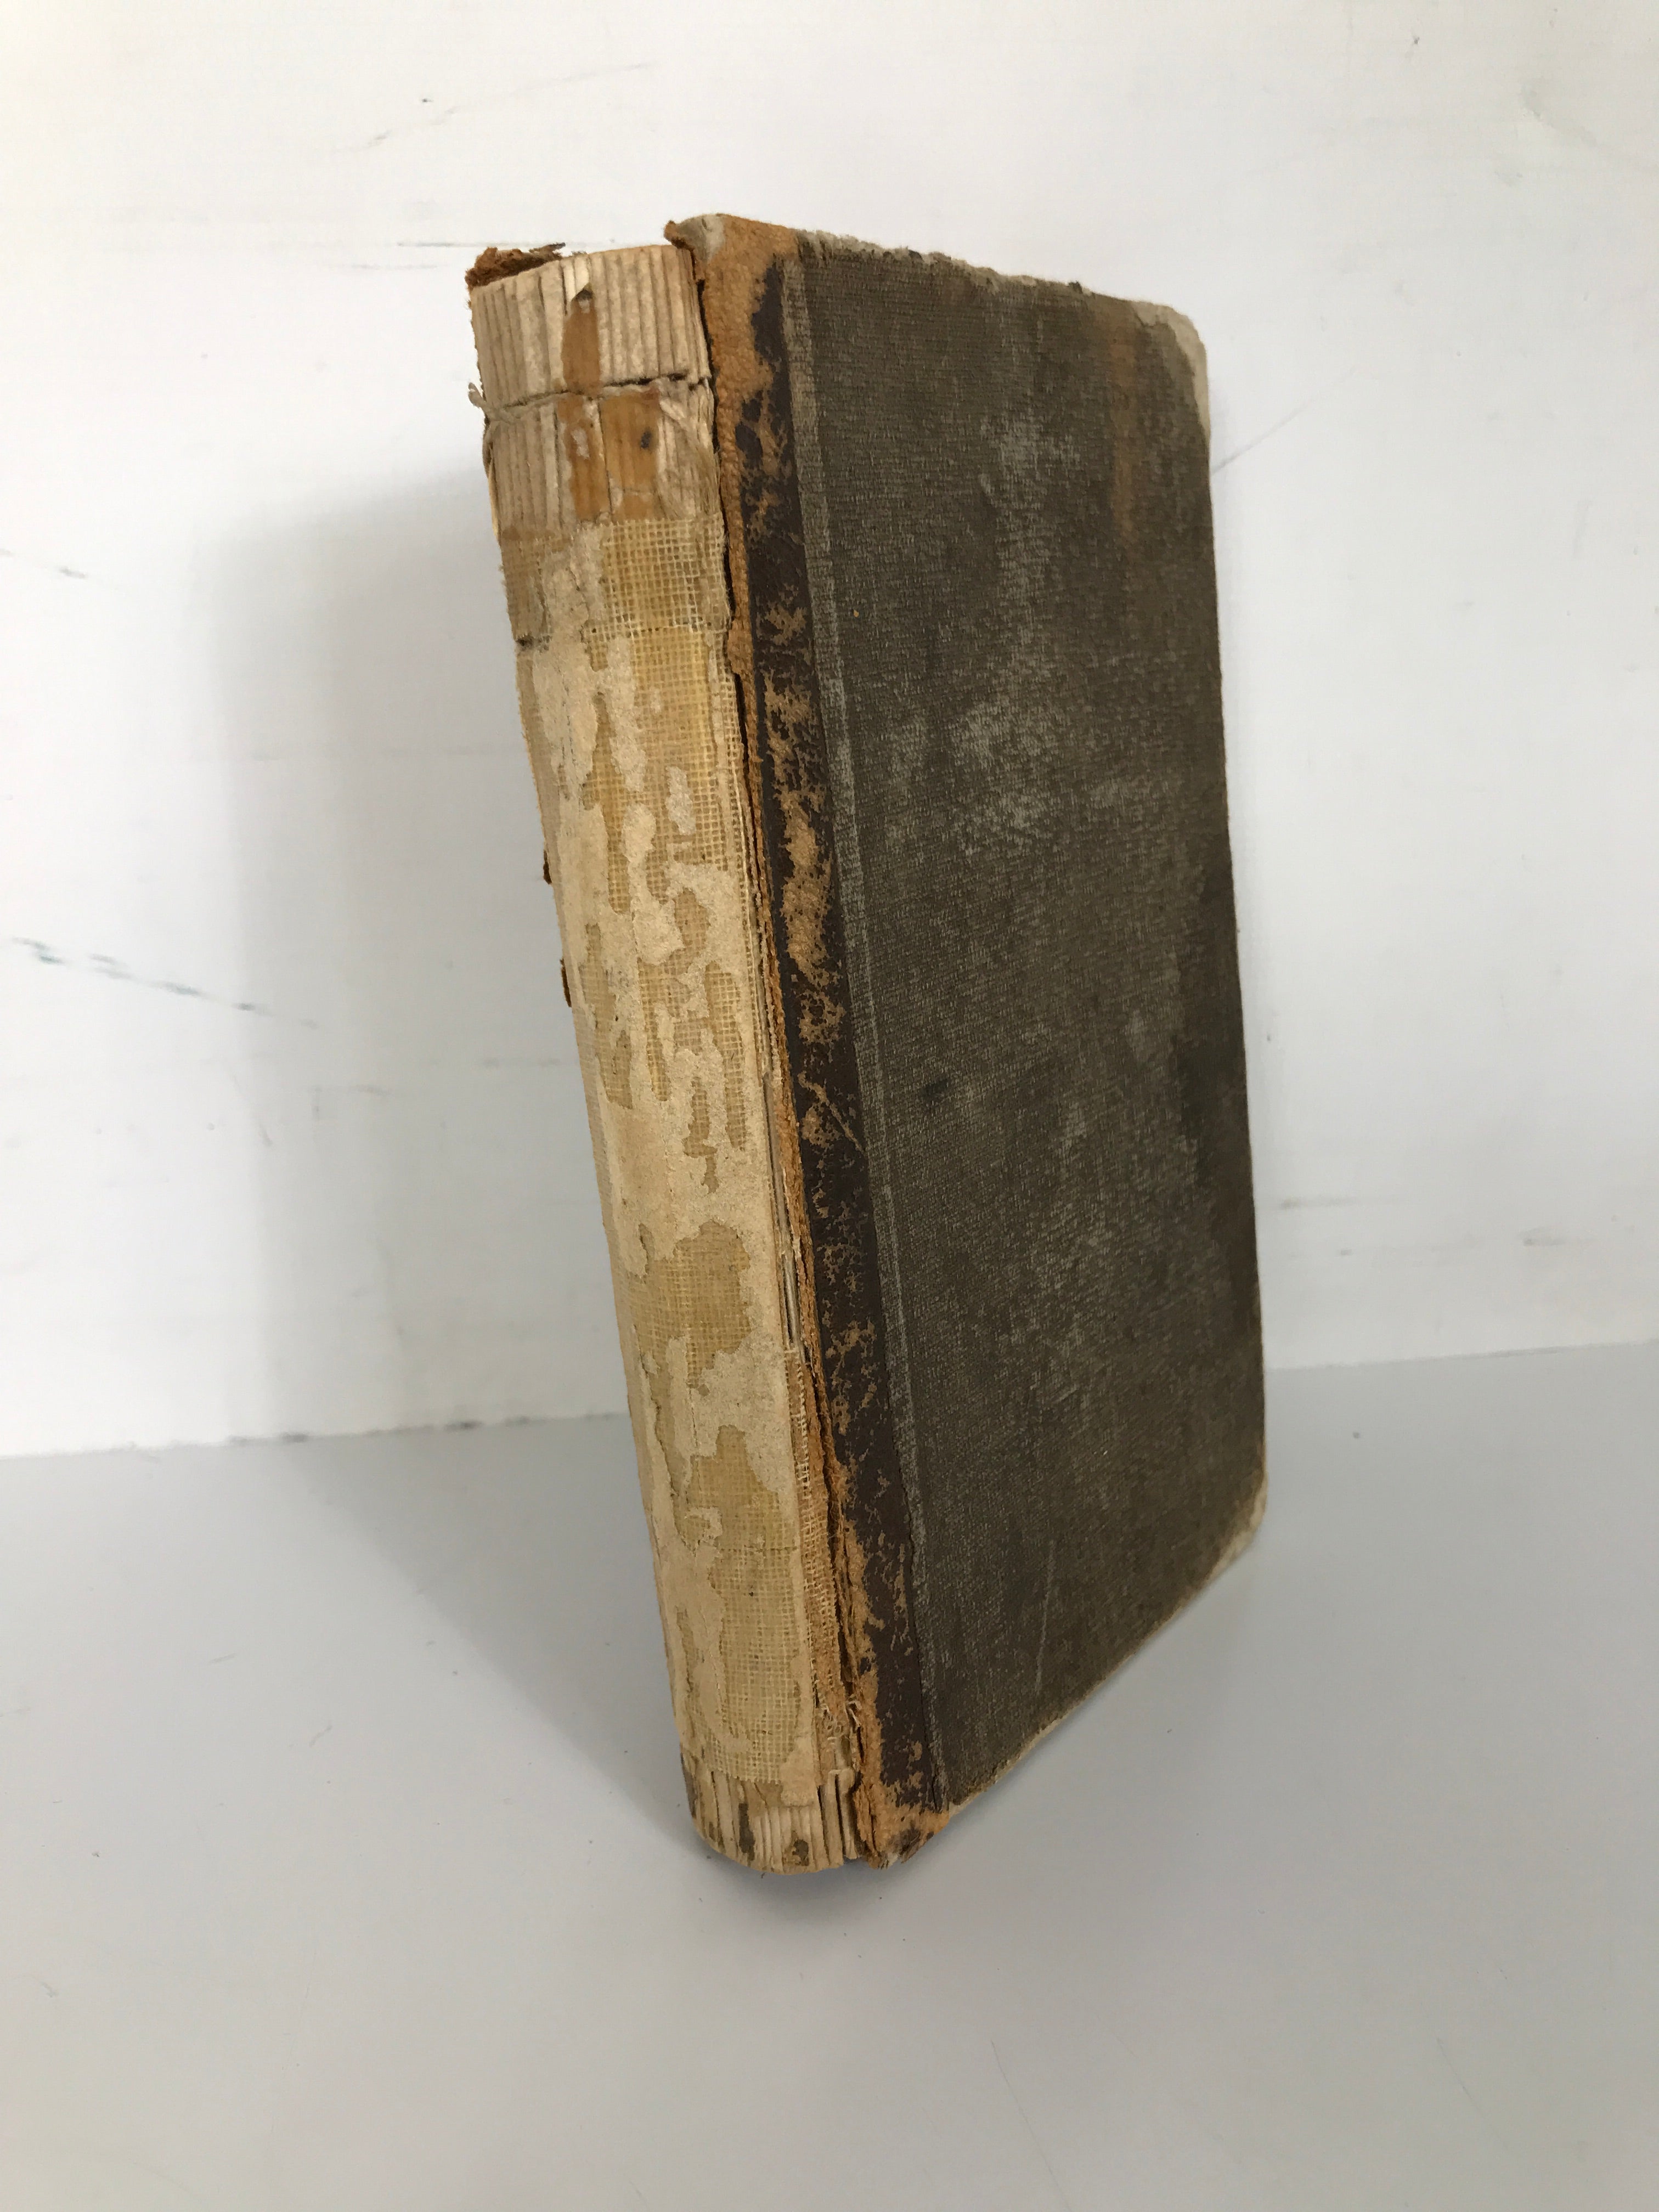 The Boston Speaker by Marcus A. Smith 1859 HC